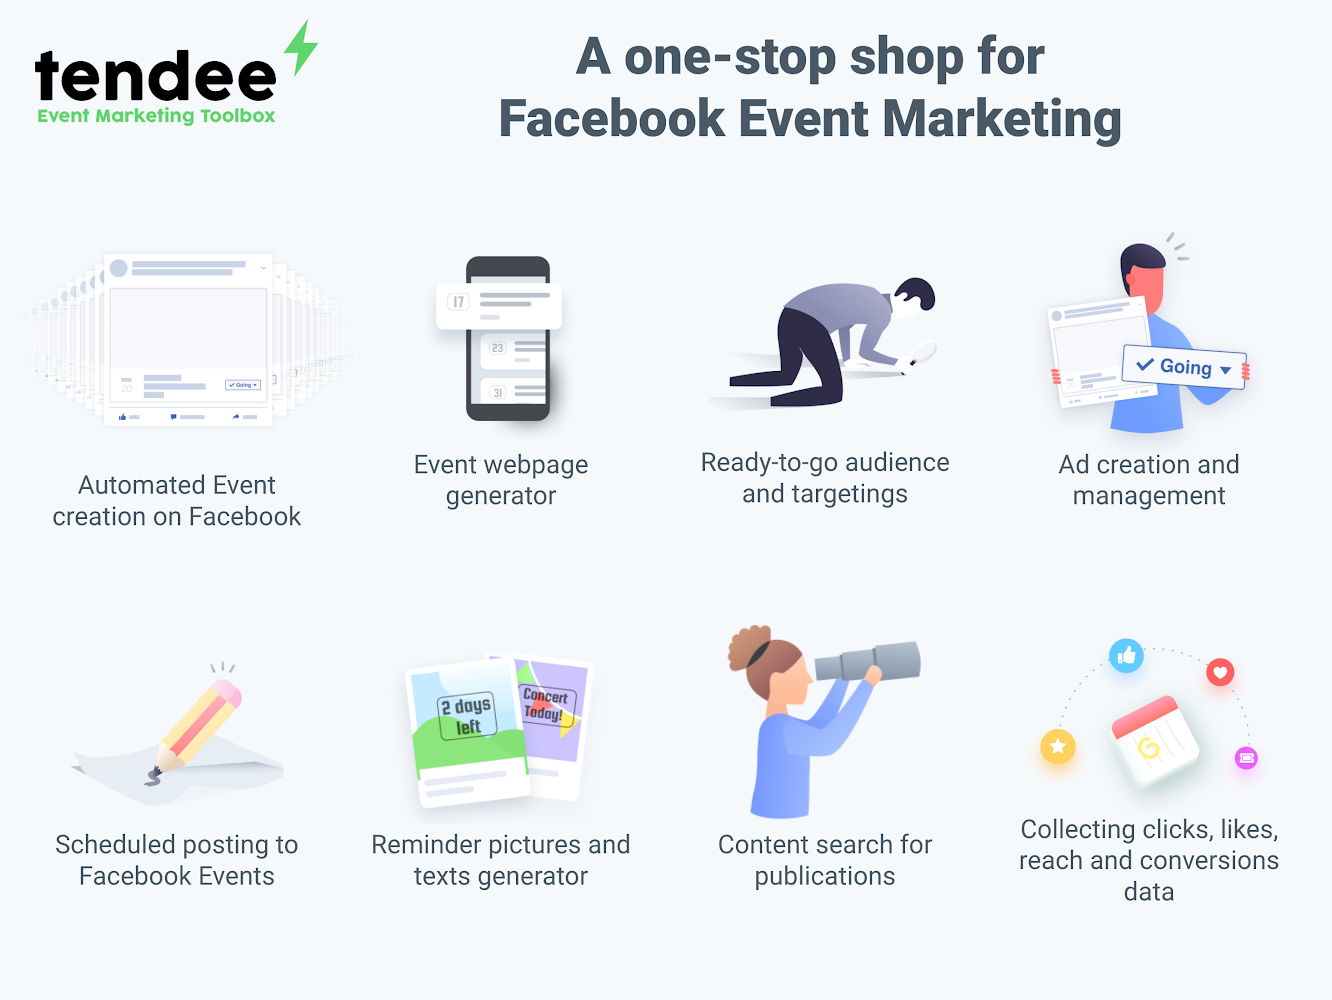 Tendee is a digital marketing toolbox for events.